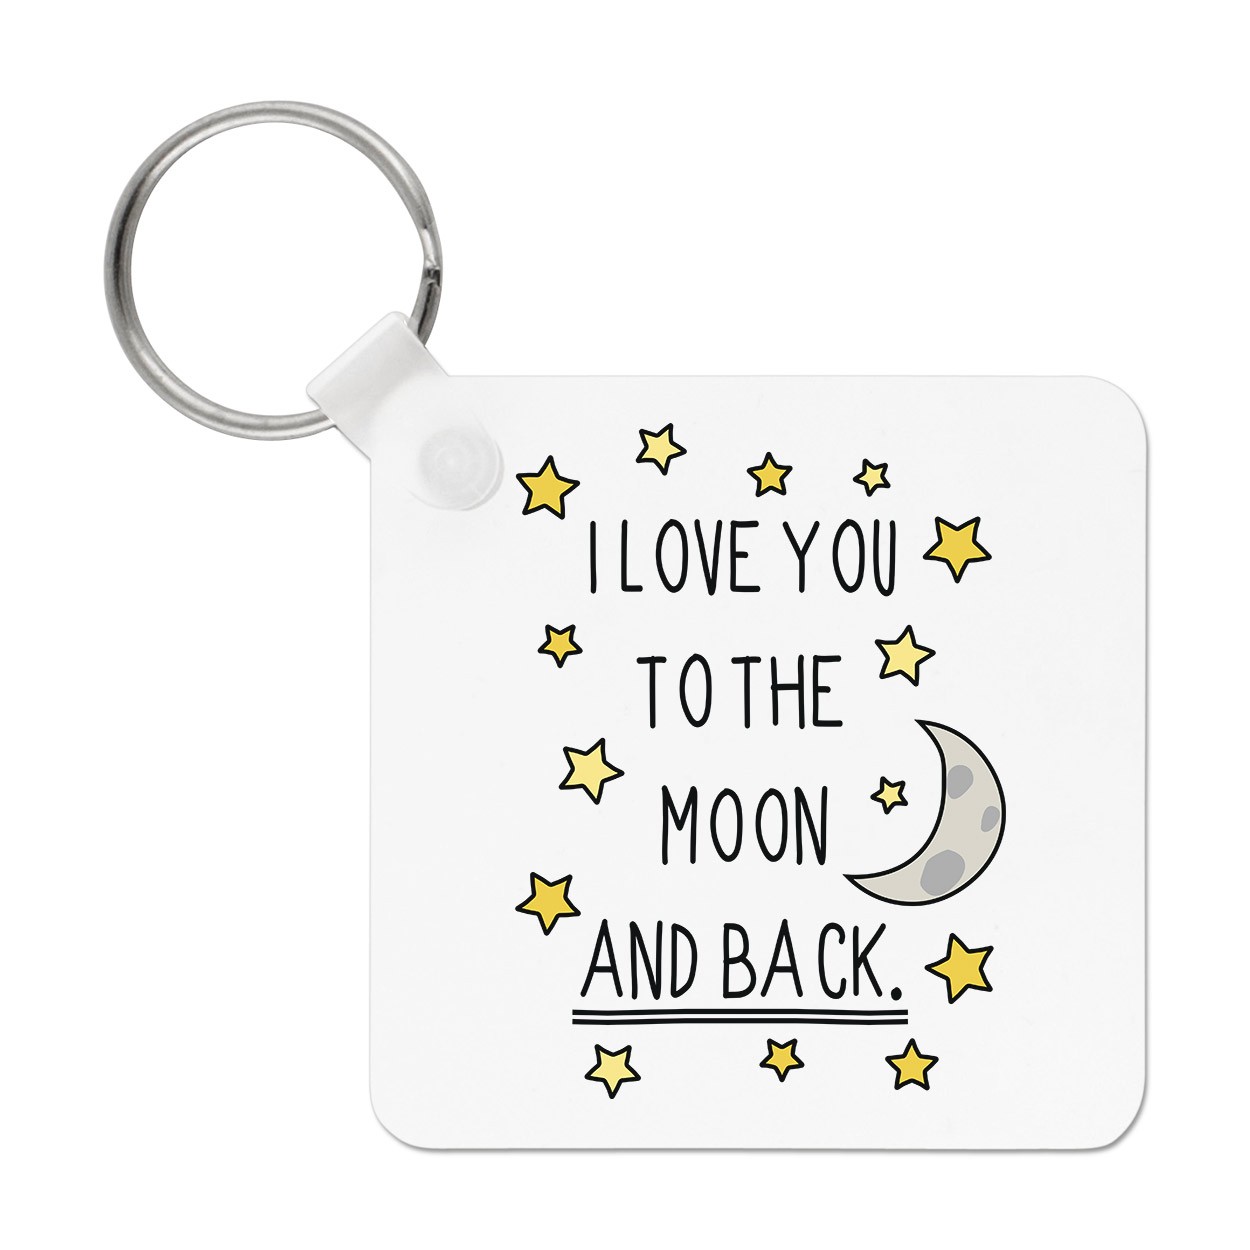 I Love You To The Moon And Back Keyring Key Chain